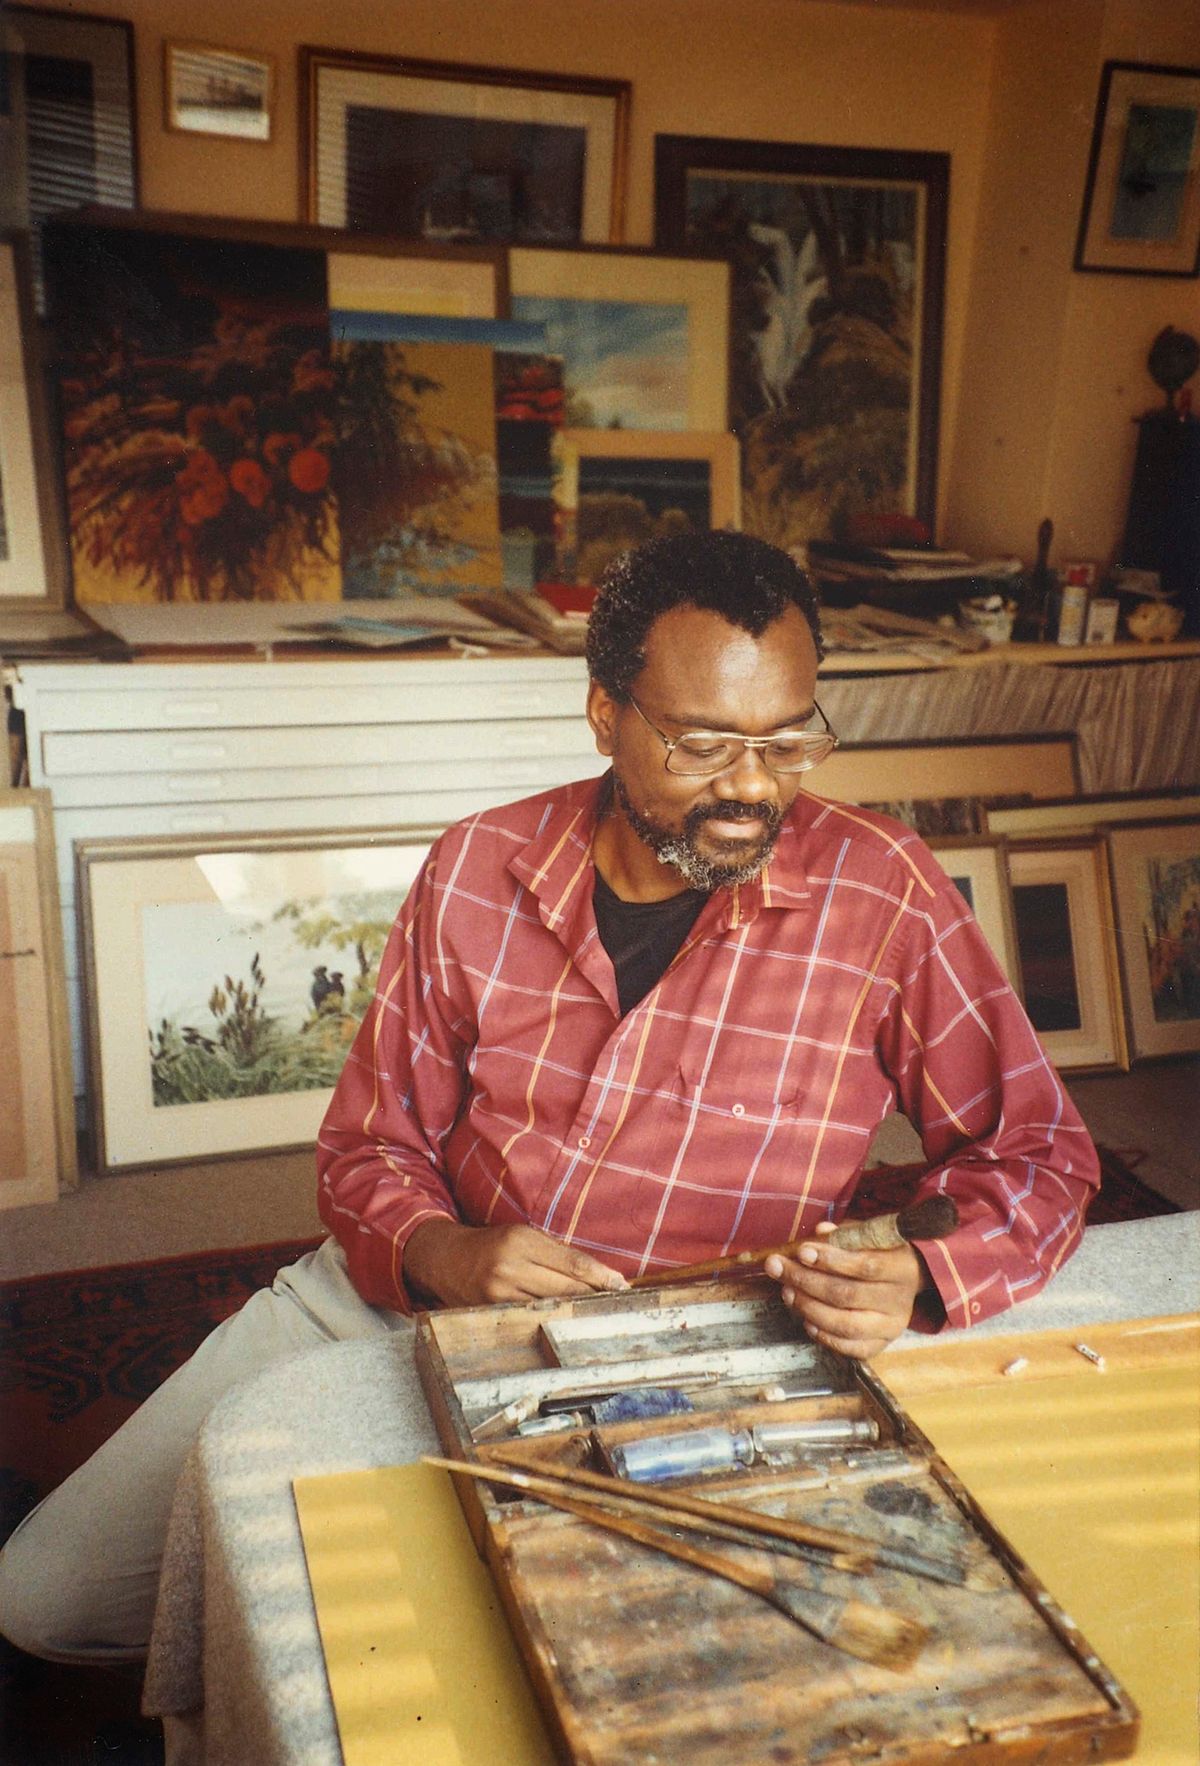 Jesse Murry with John Constable’s paint brushes, Somerset, England, 1991. Photograph by Richard Constable. Courtesy of The Jesse Murry Foundation.